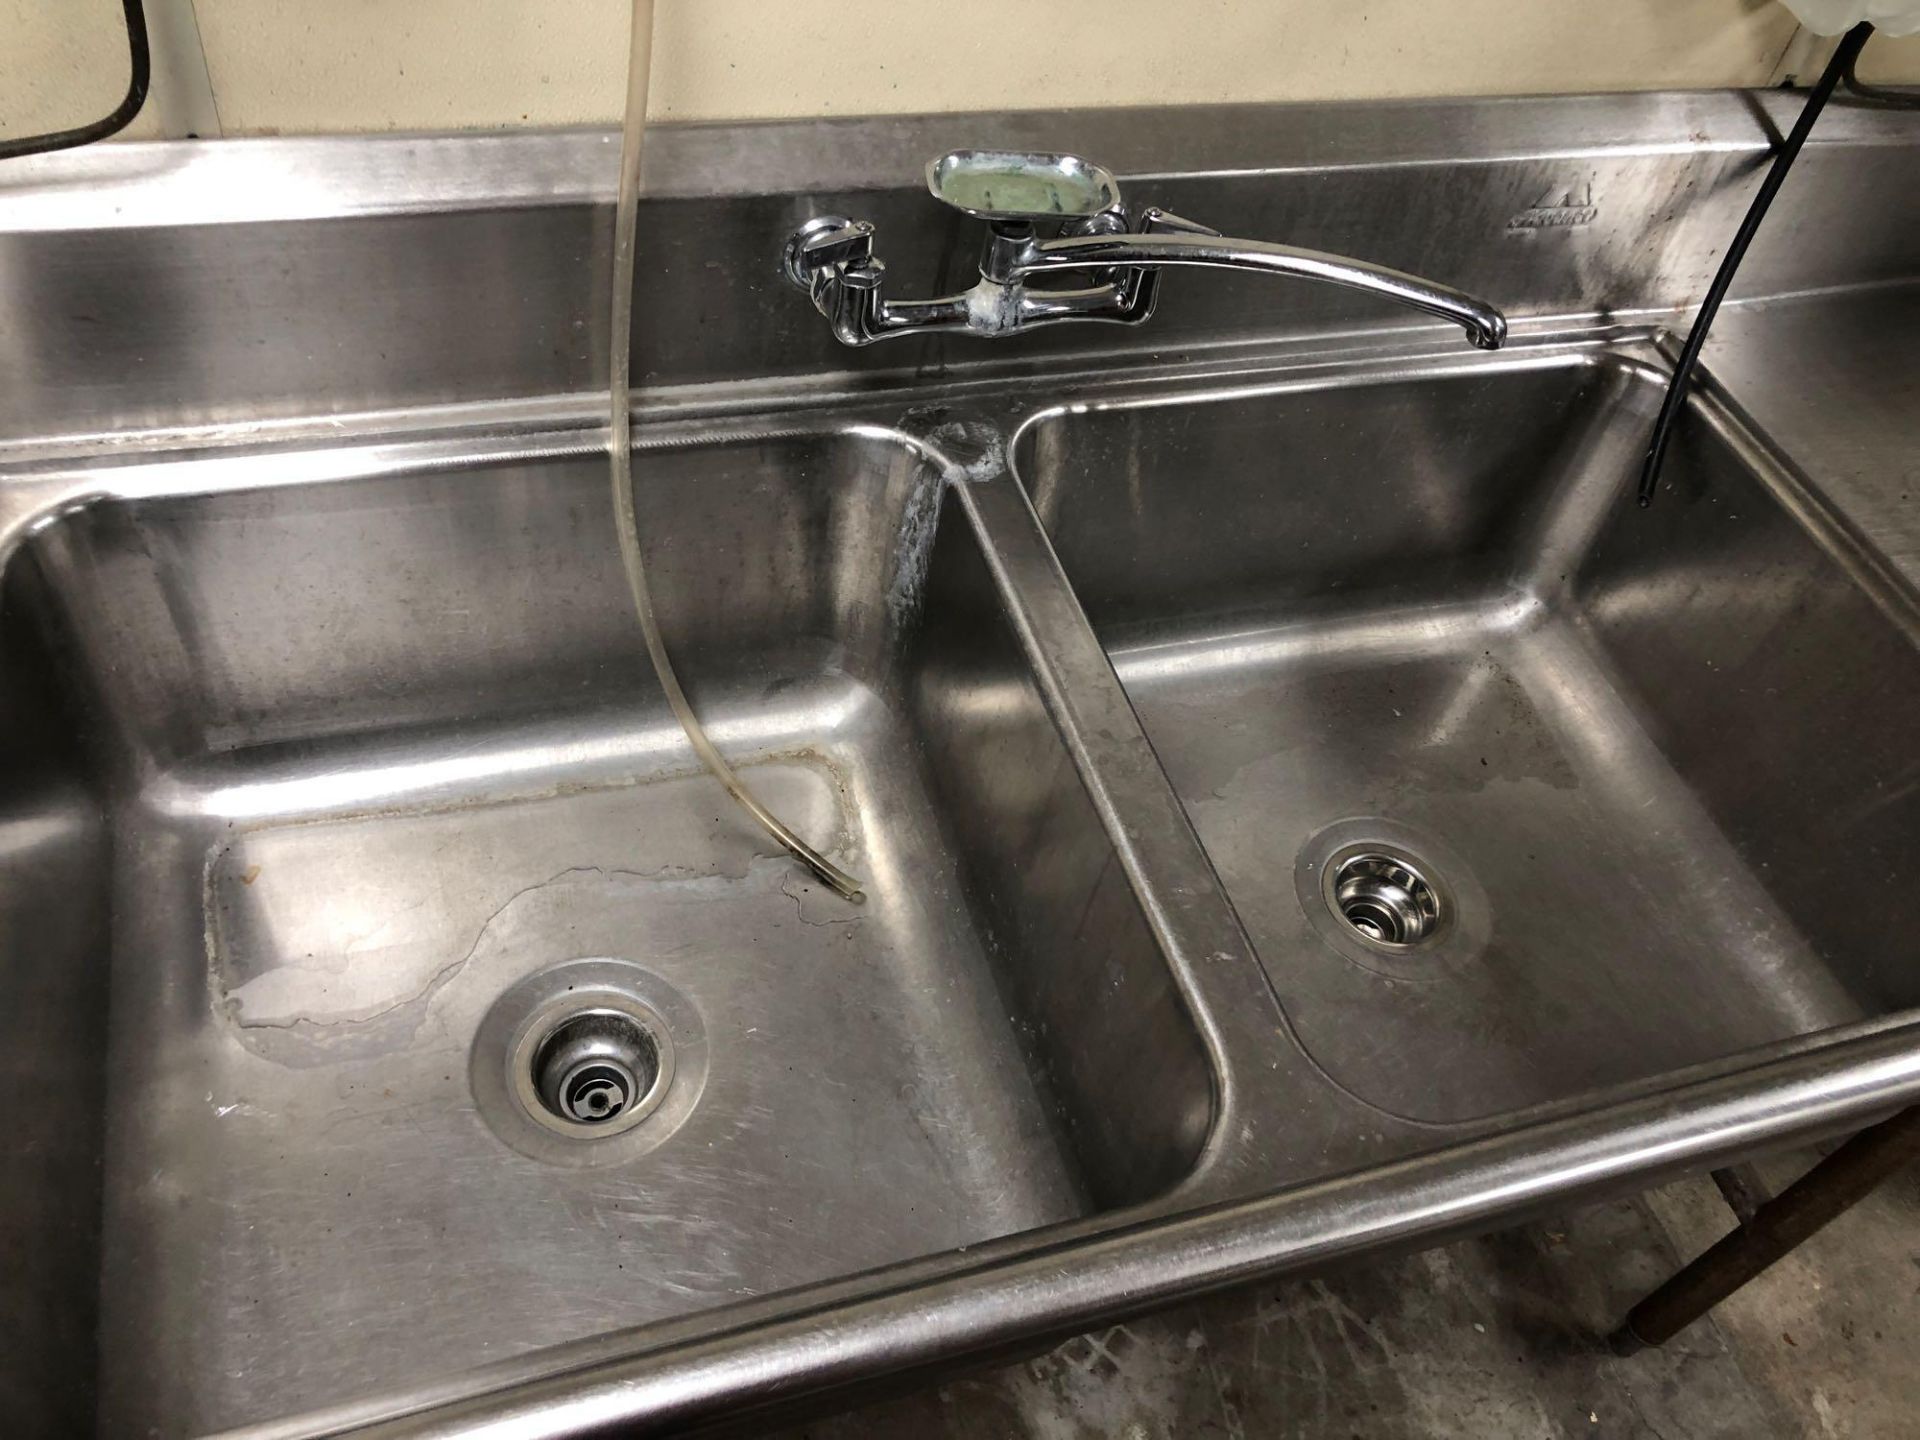 Stainless Steel 2 Basin Sink - Image 2 of 3